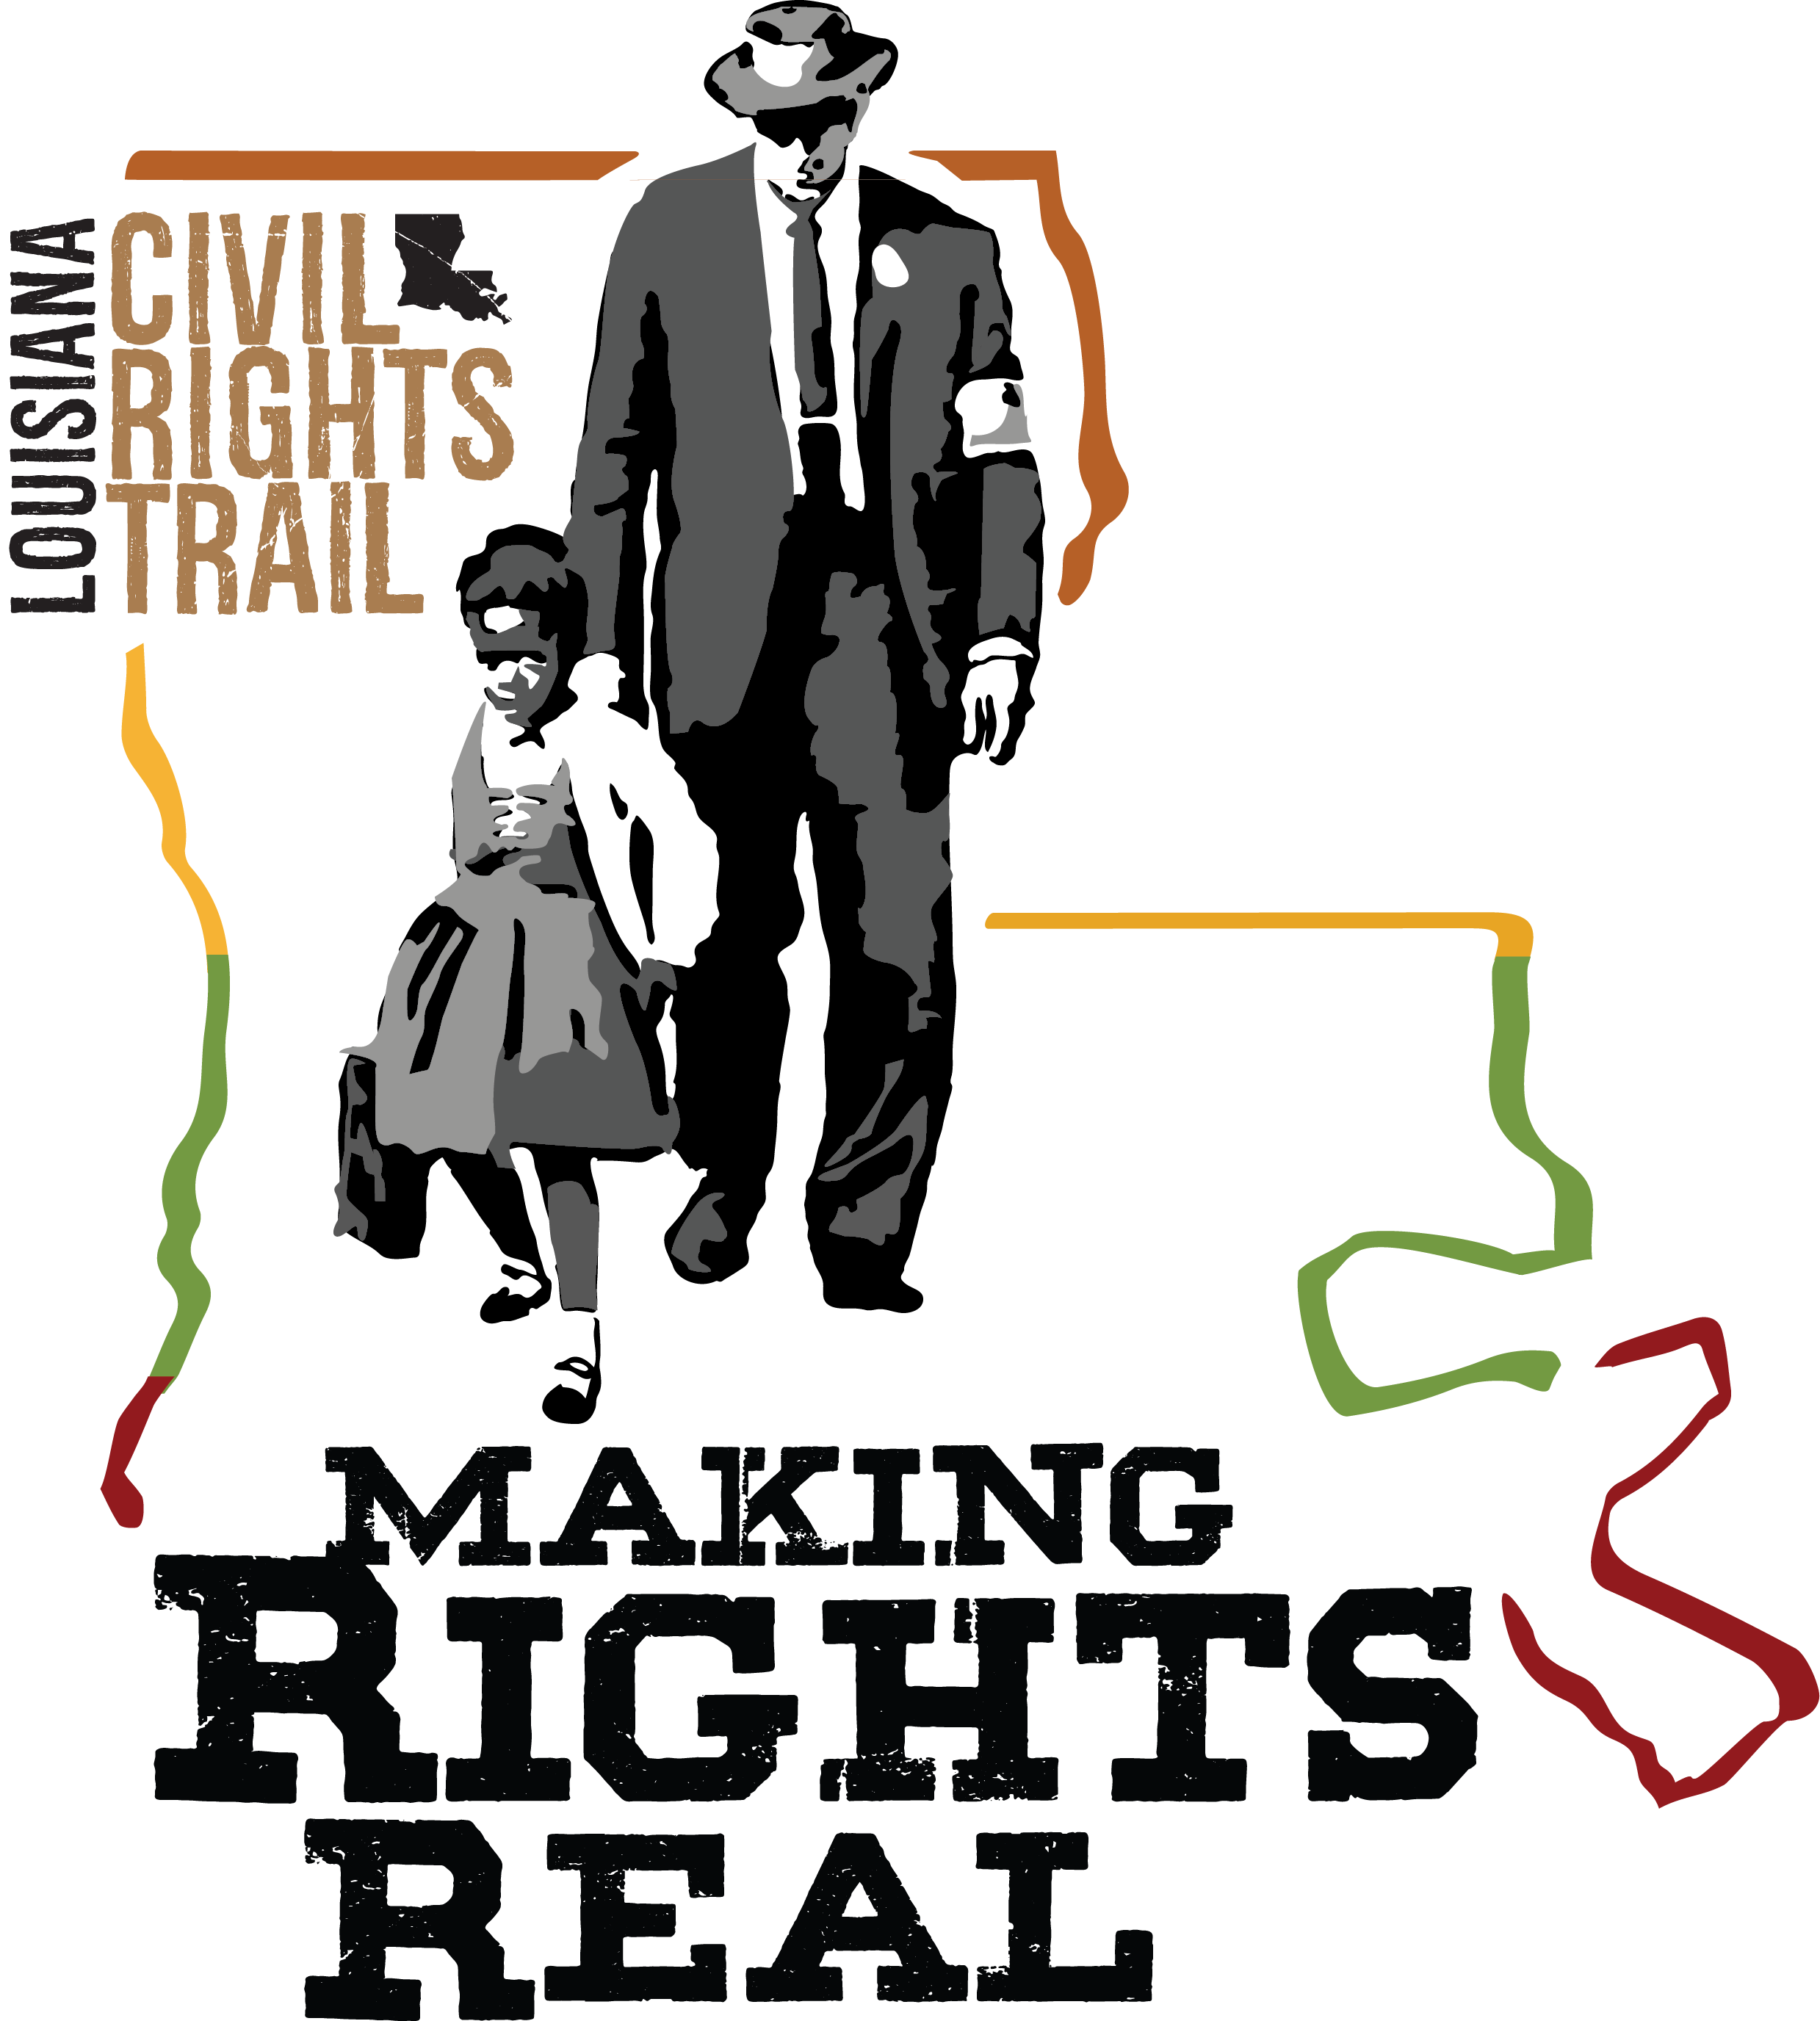 Louisiana Civil Rights Trail Podcast Produced by Ingredient